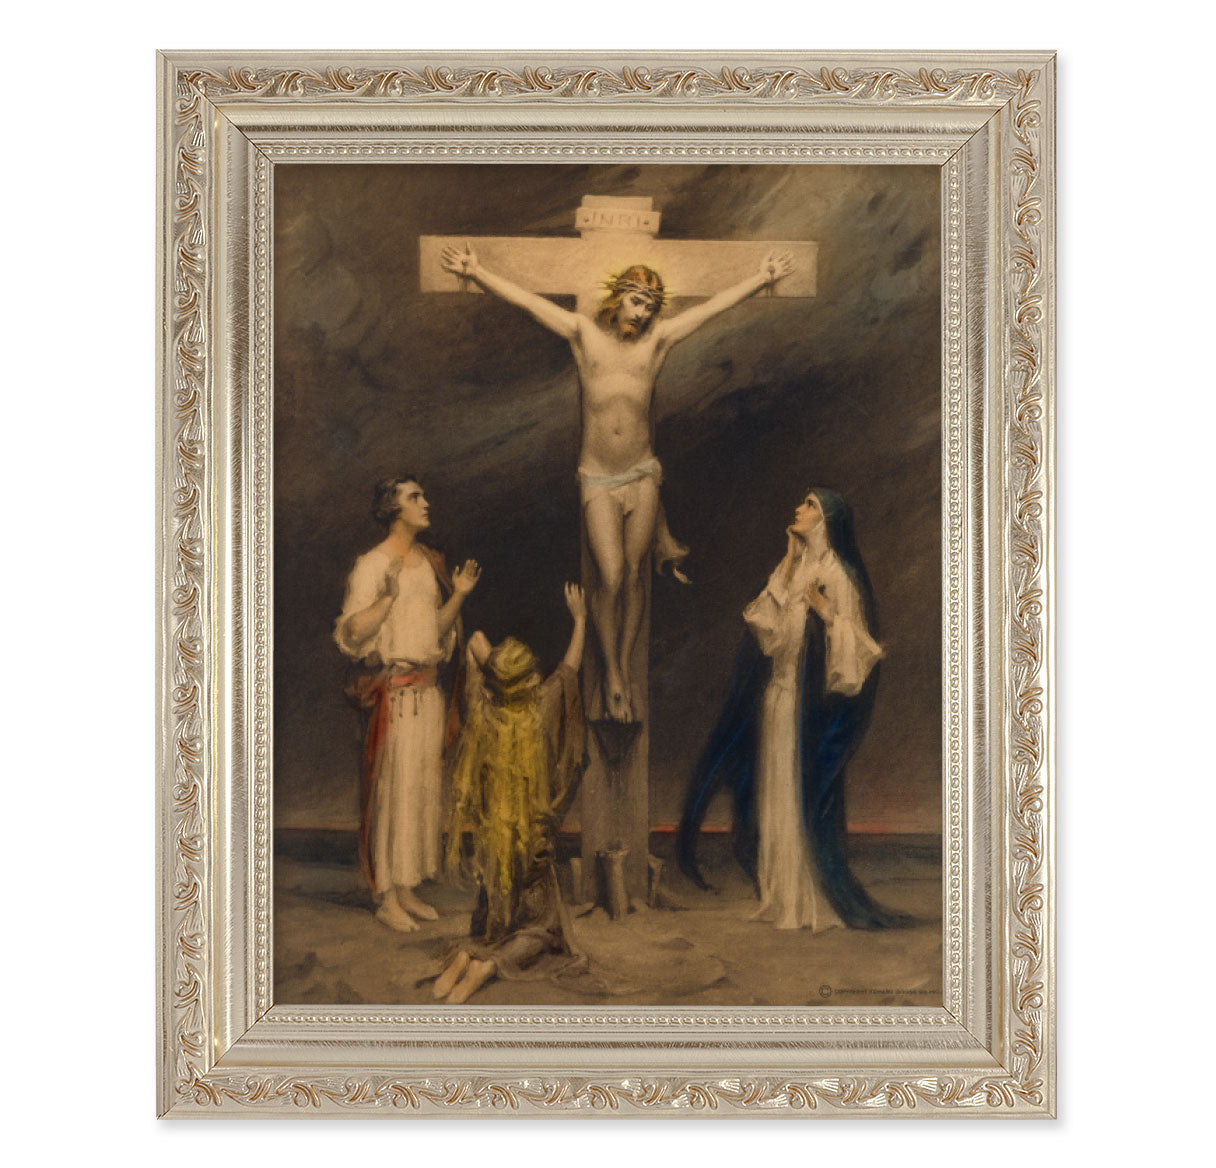 Crucifixion of the Christ Antique Silver Framed Art